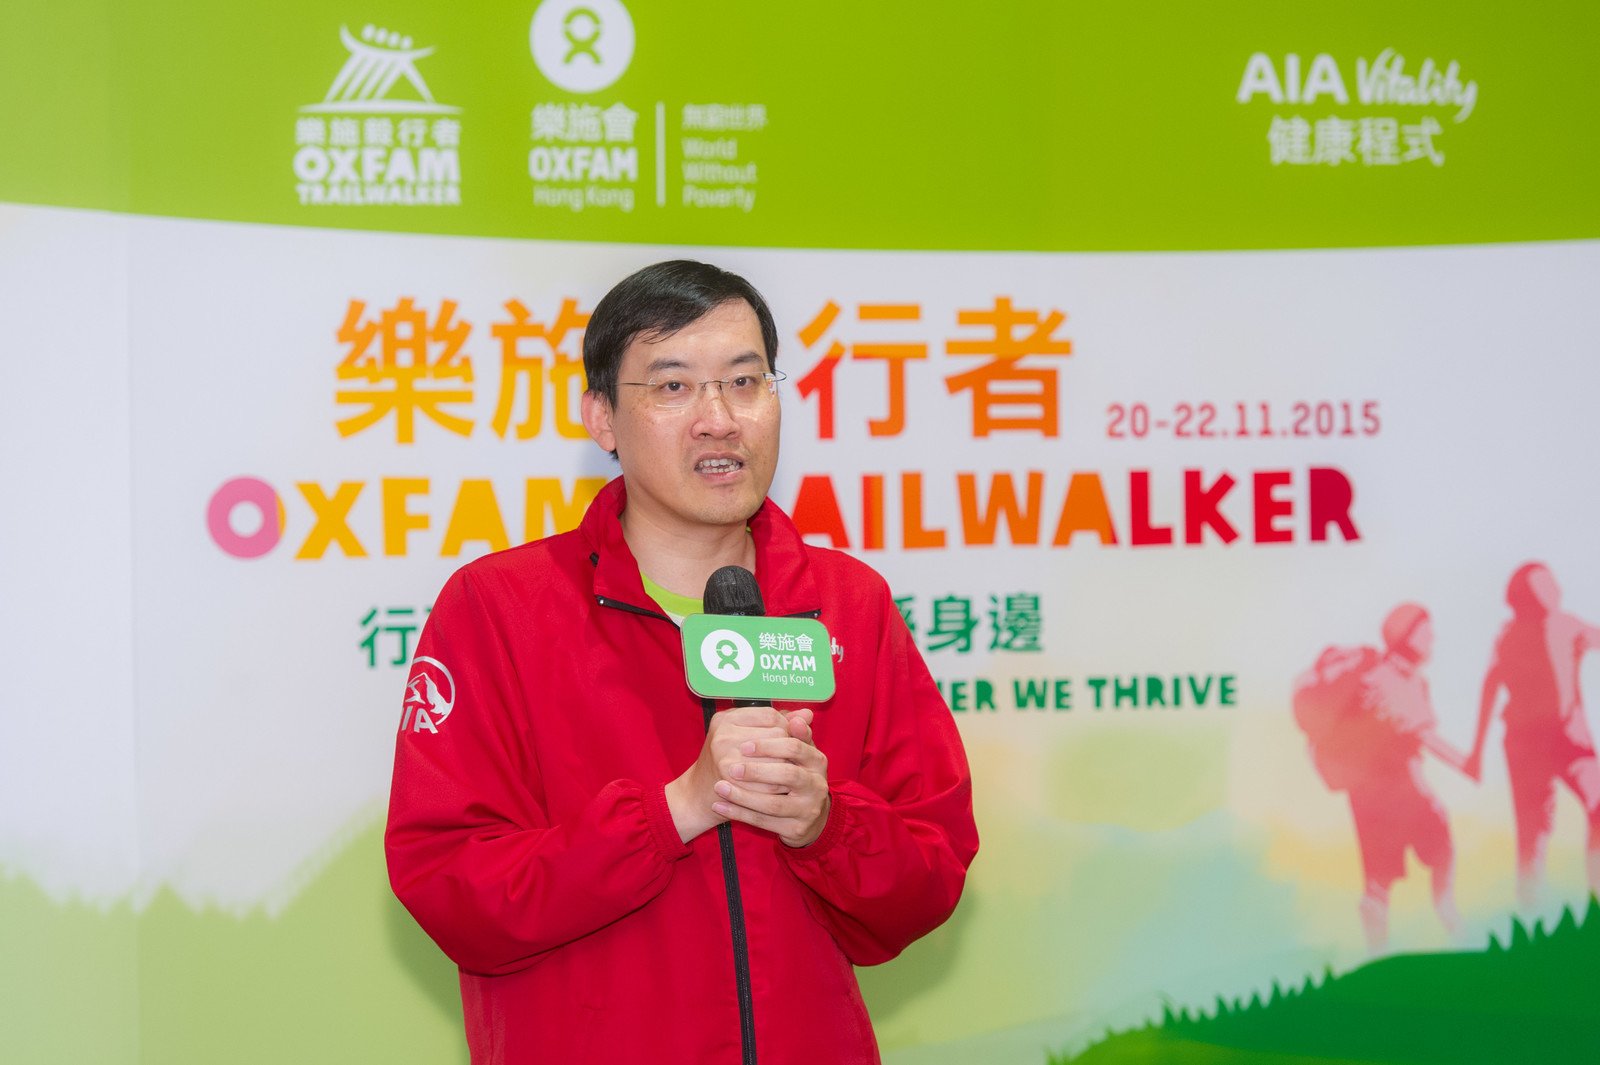 Jacky Chan, Chief Executive Officer of AIA Hong Kong and Macau, gave a speech at the Oxfam Trailwalker 2015 press conference today.